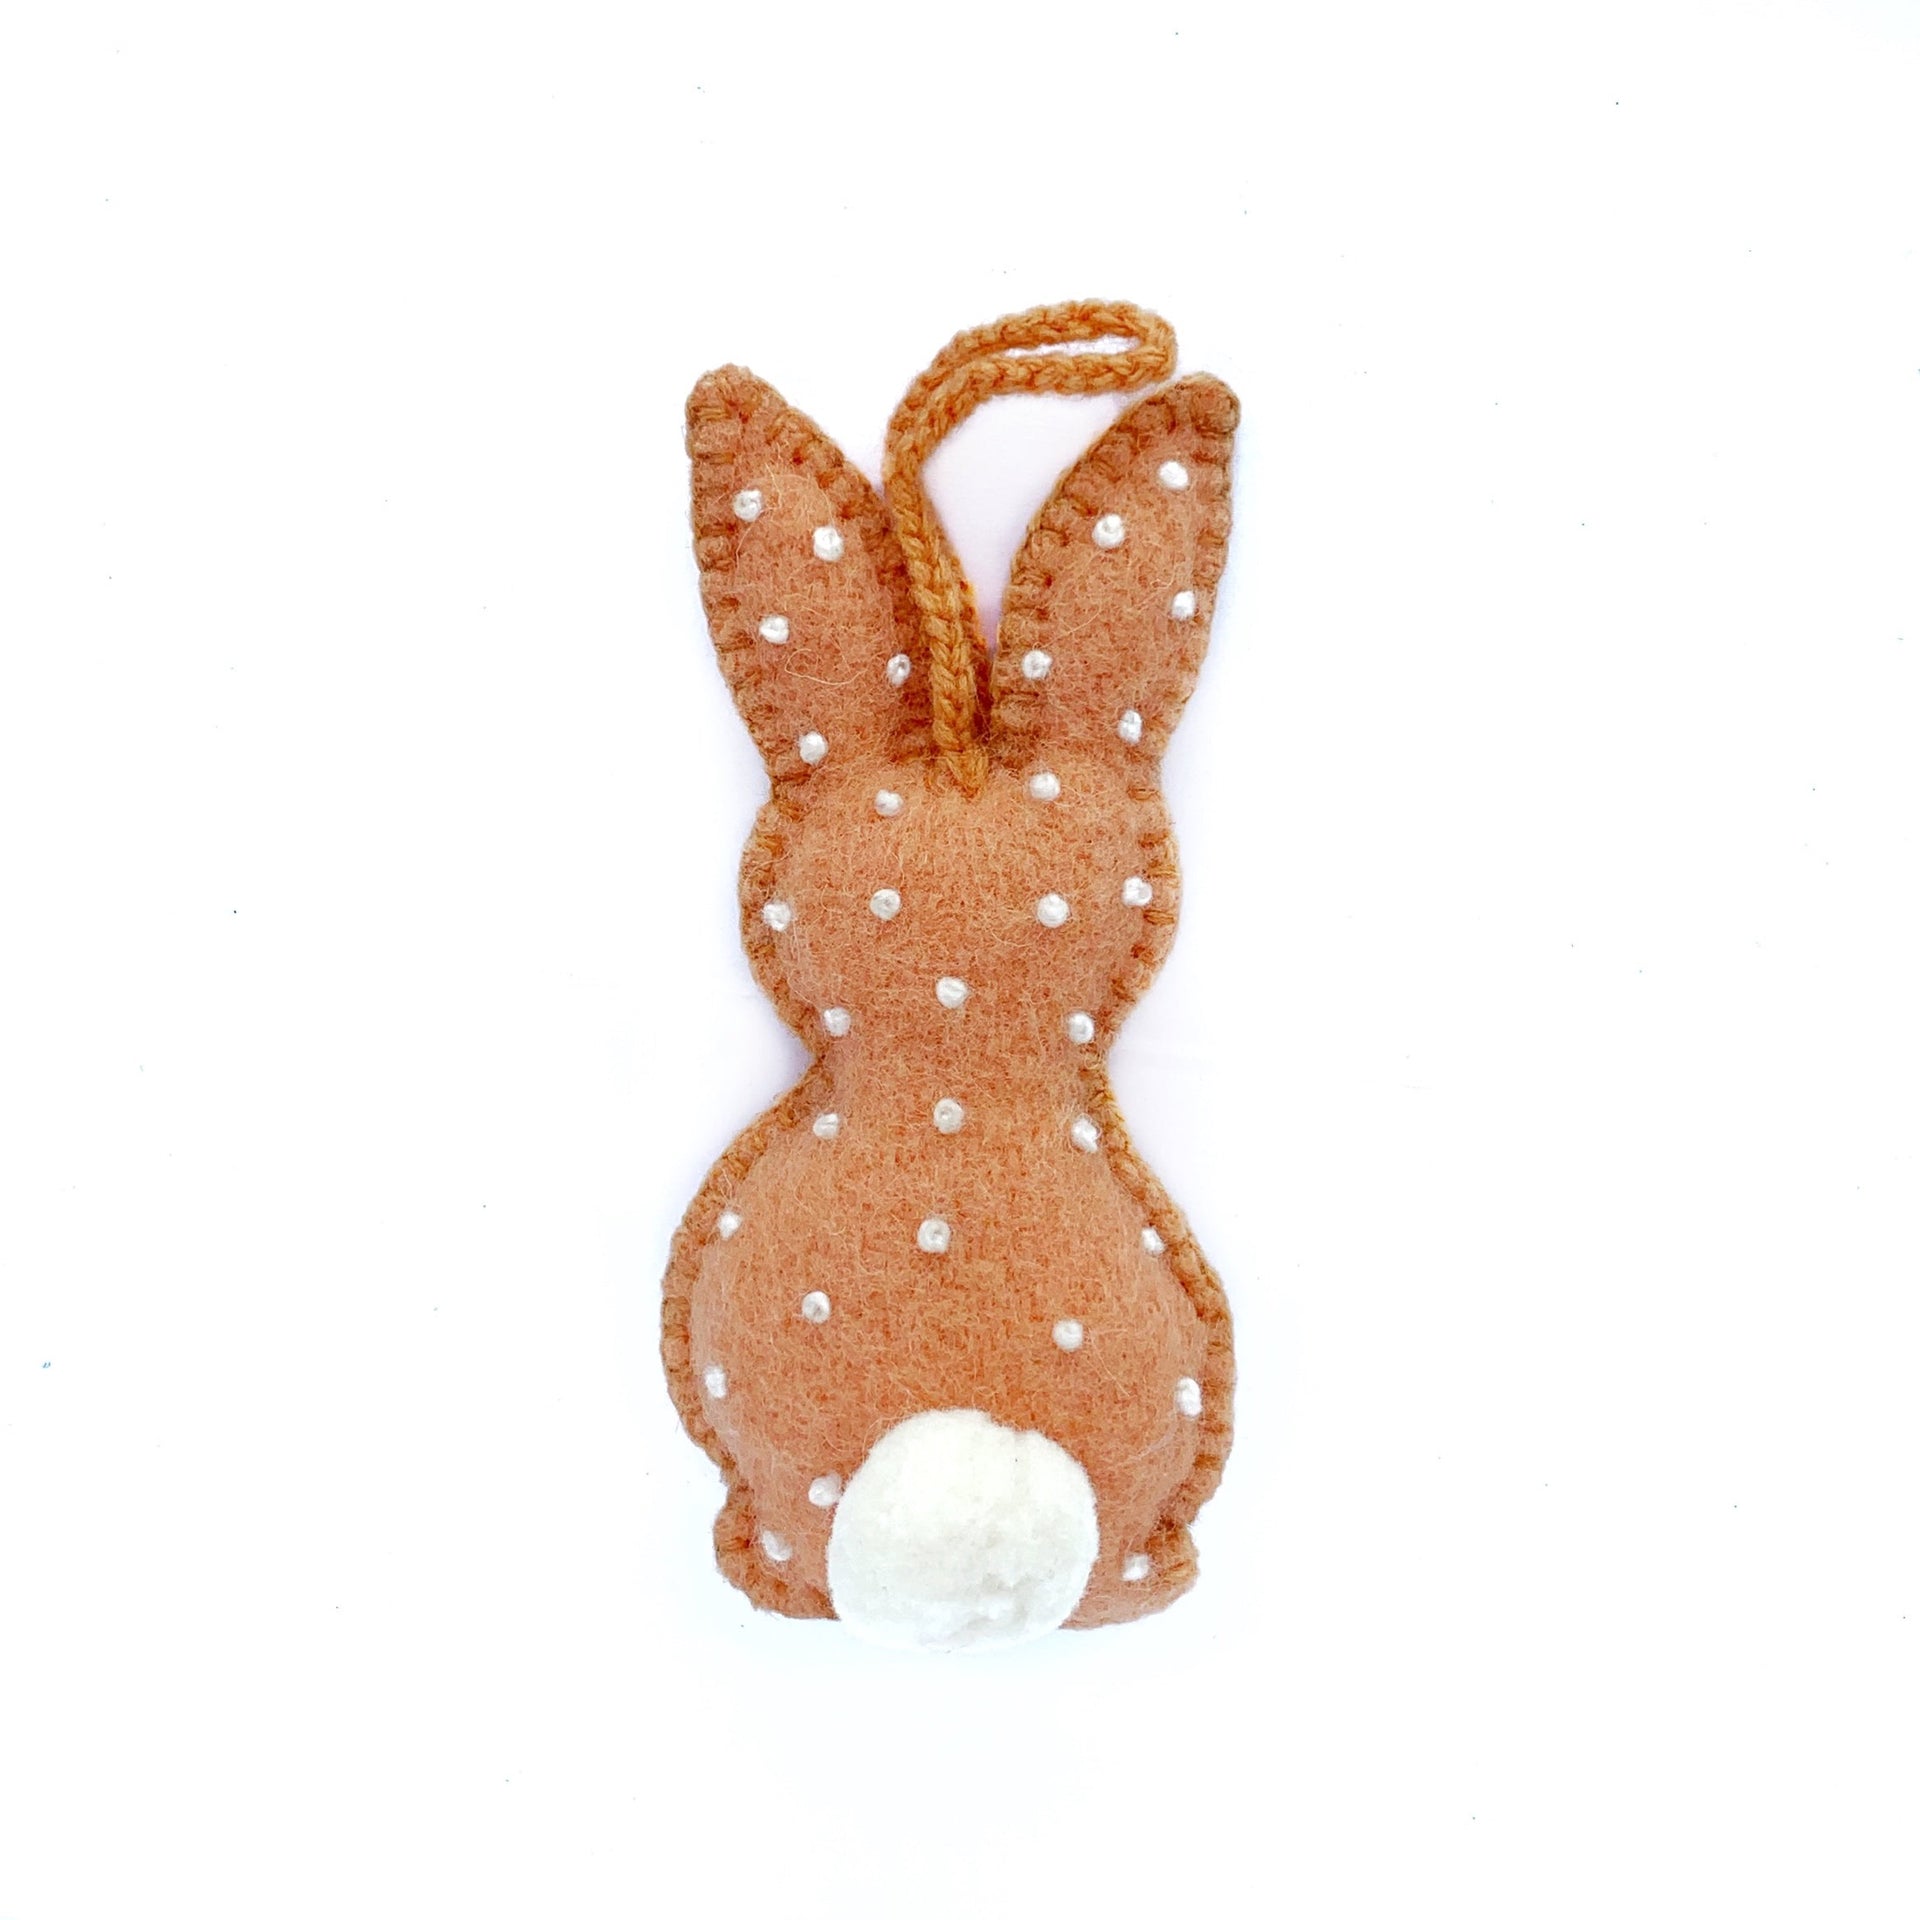 Pastel orange handmade Easter bunny ornament with embroidered white dots and pom pom tail.